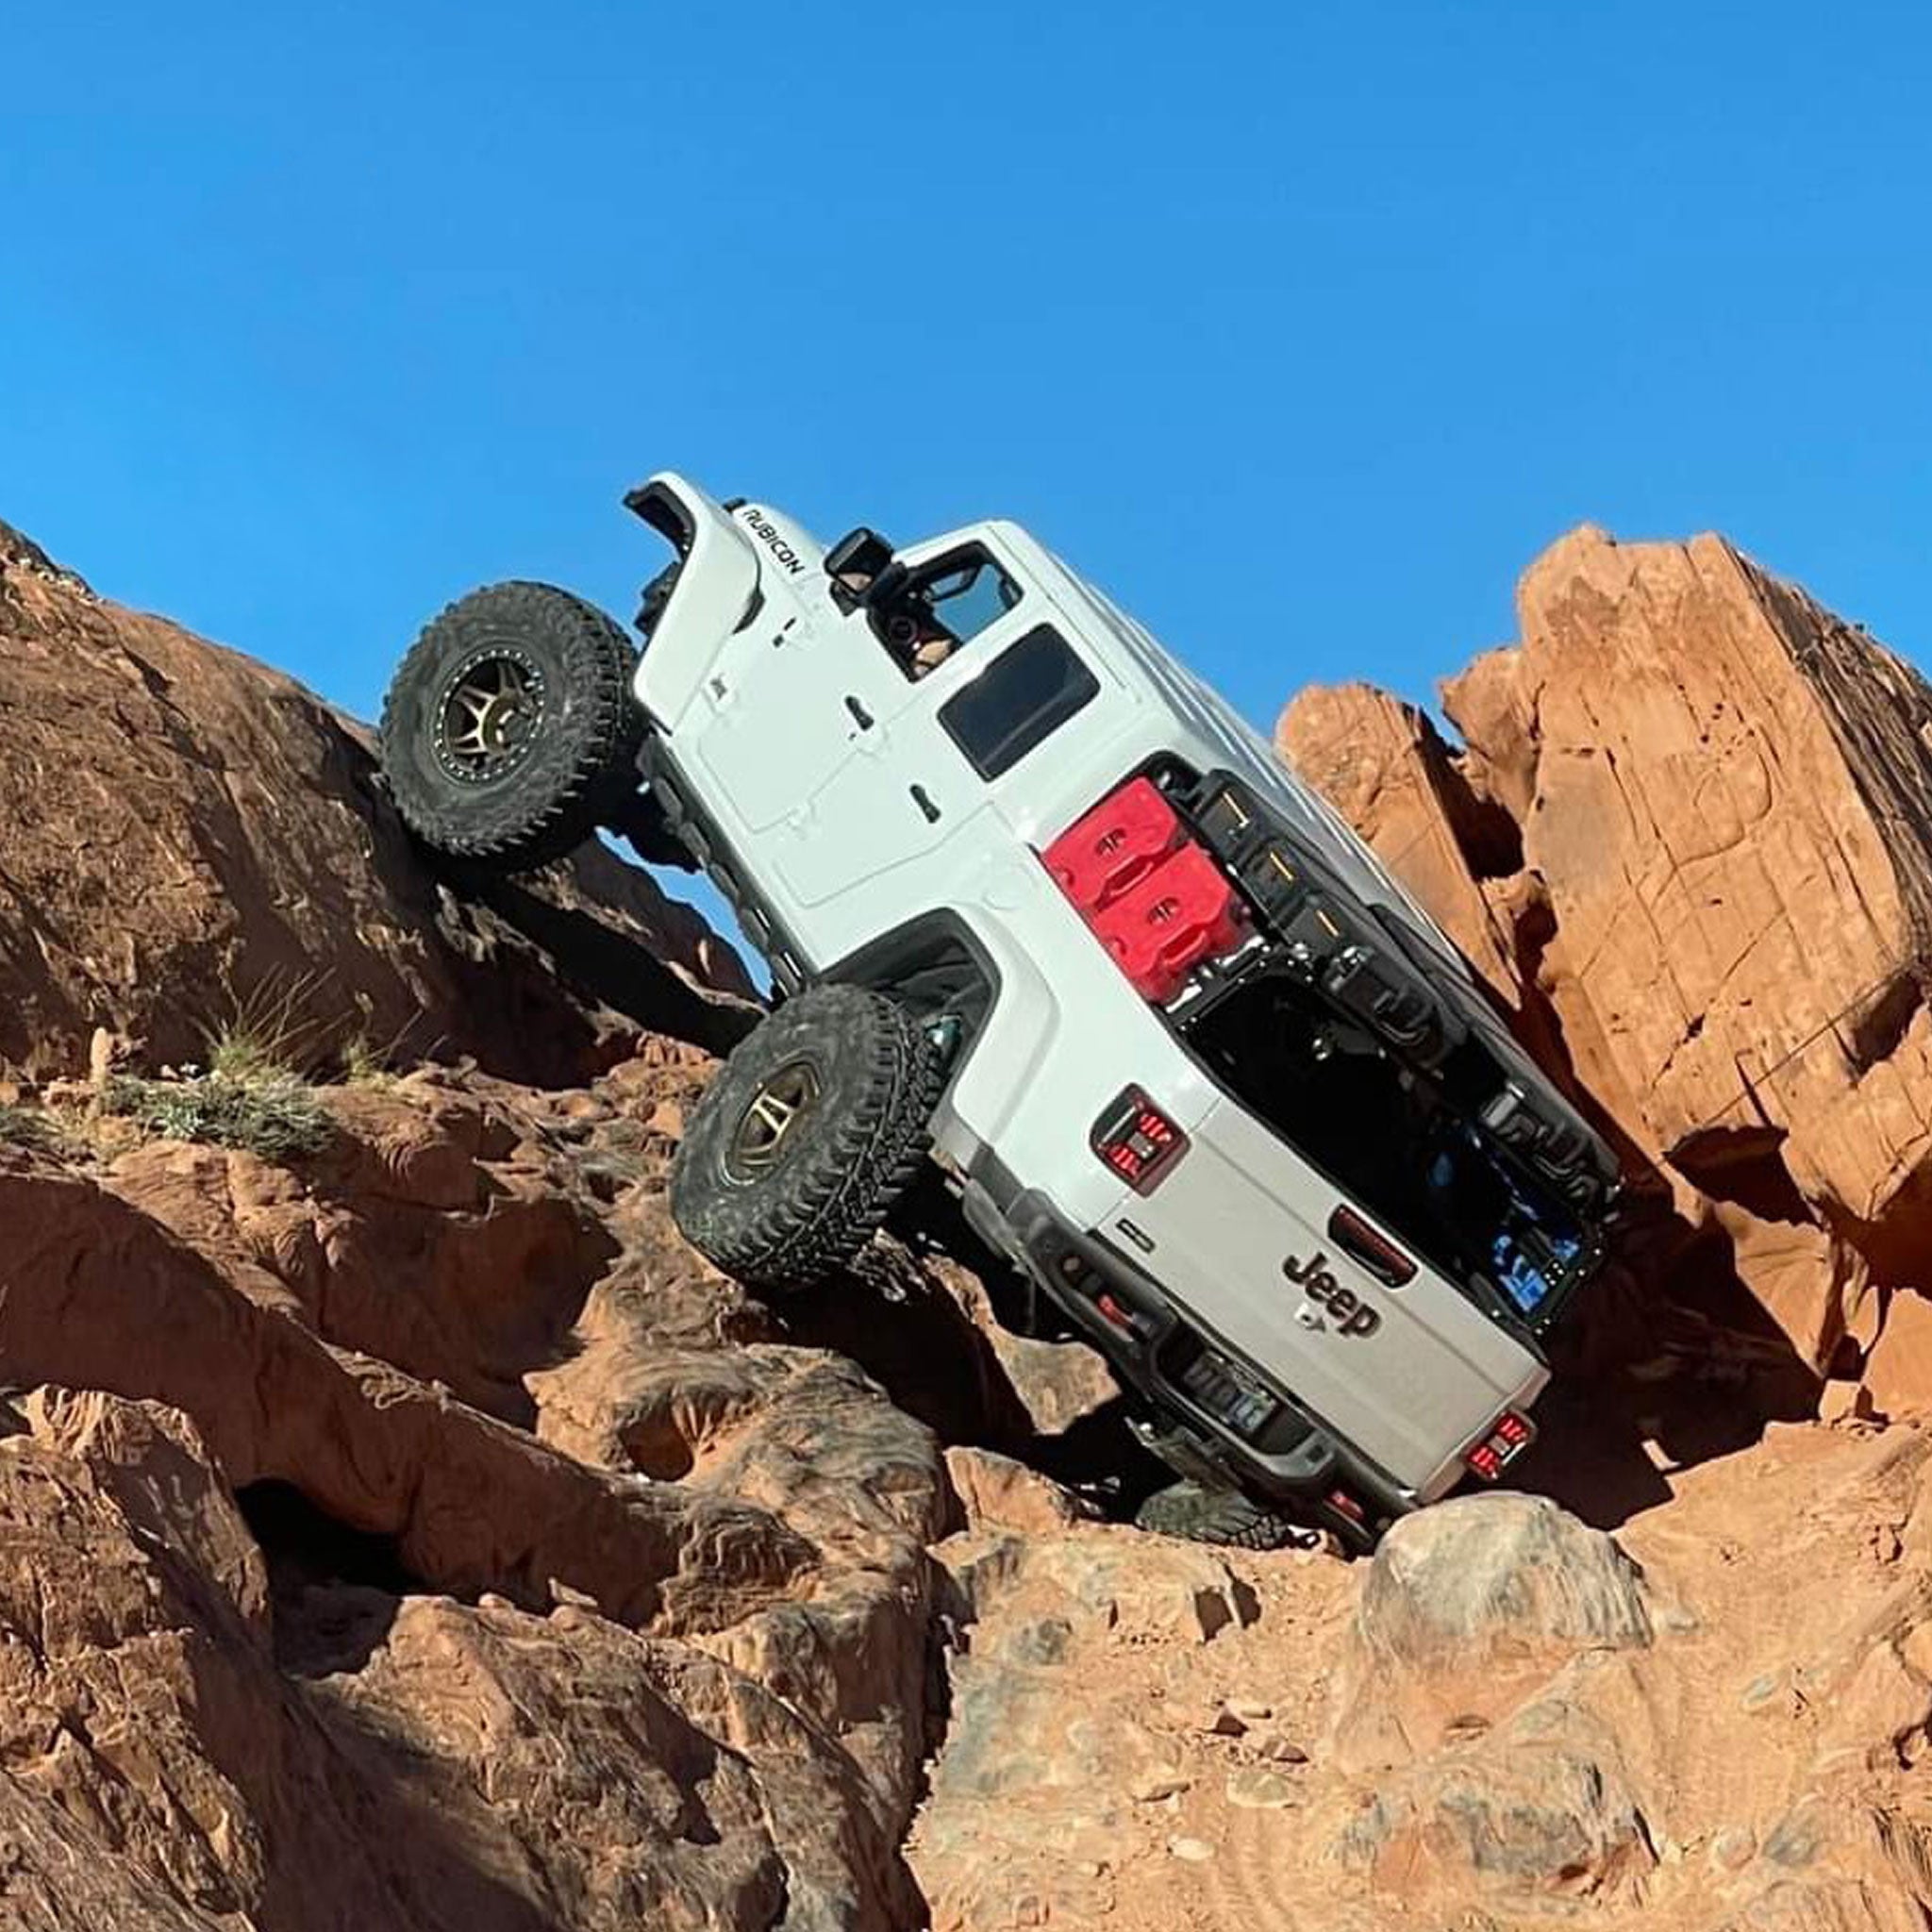 Rock climbing Jeep Gladiator Rubicon with XTR1 Bed Rack, RotoPax, Vault cases, and traction boards.  